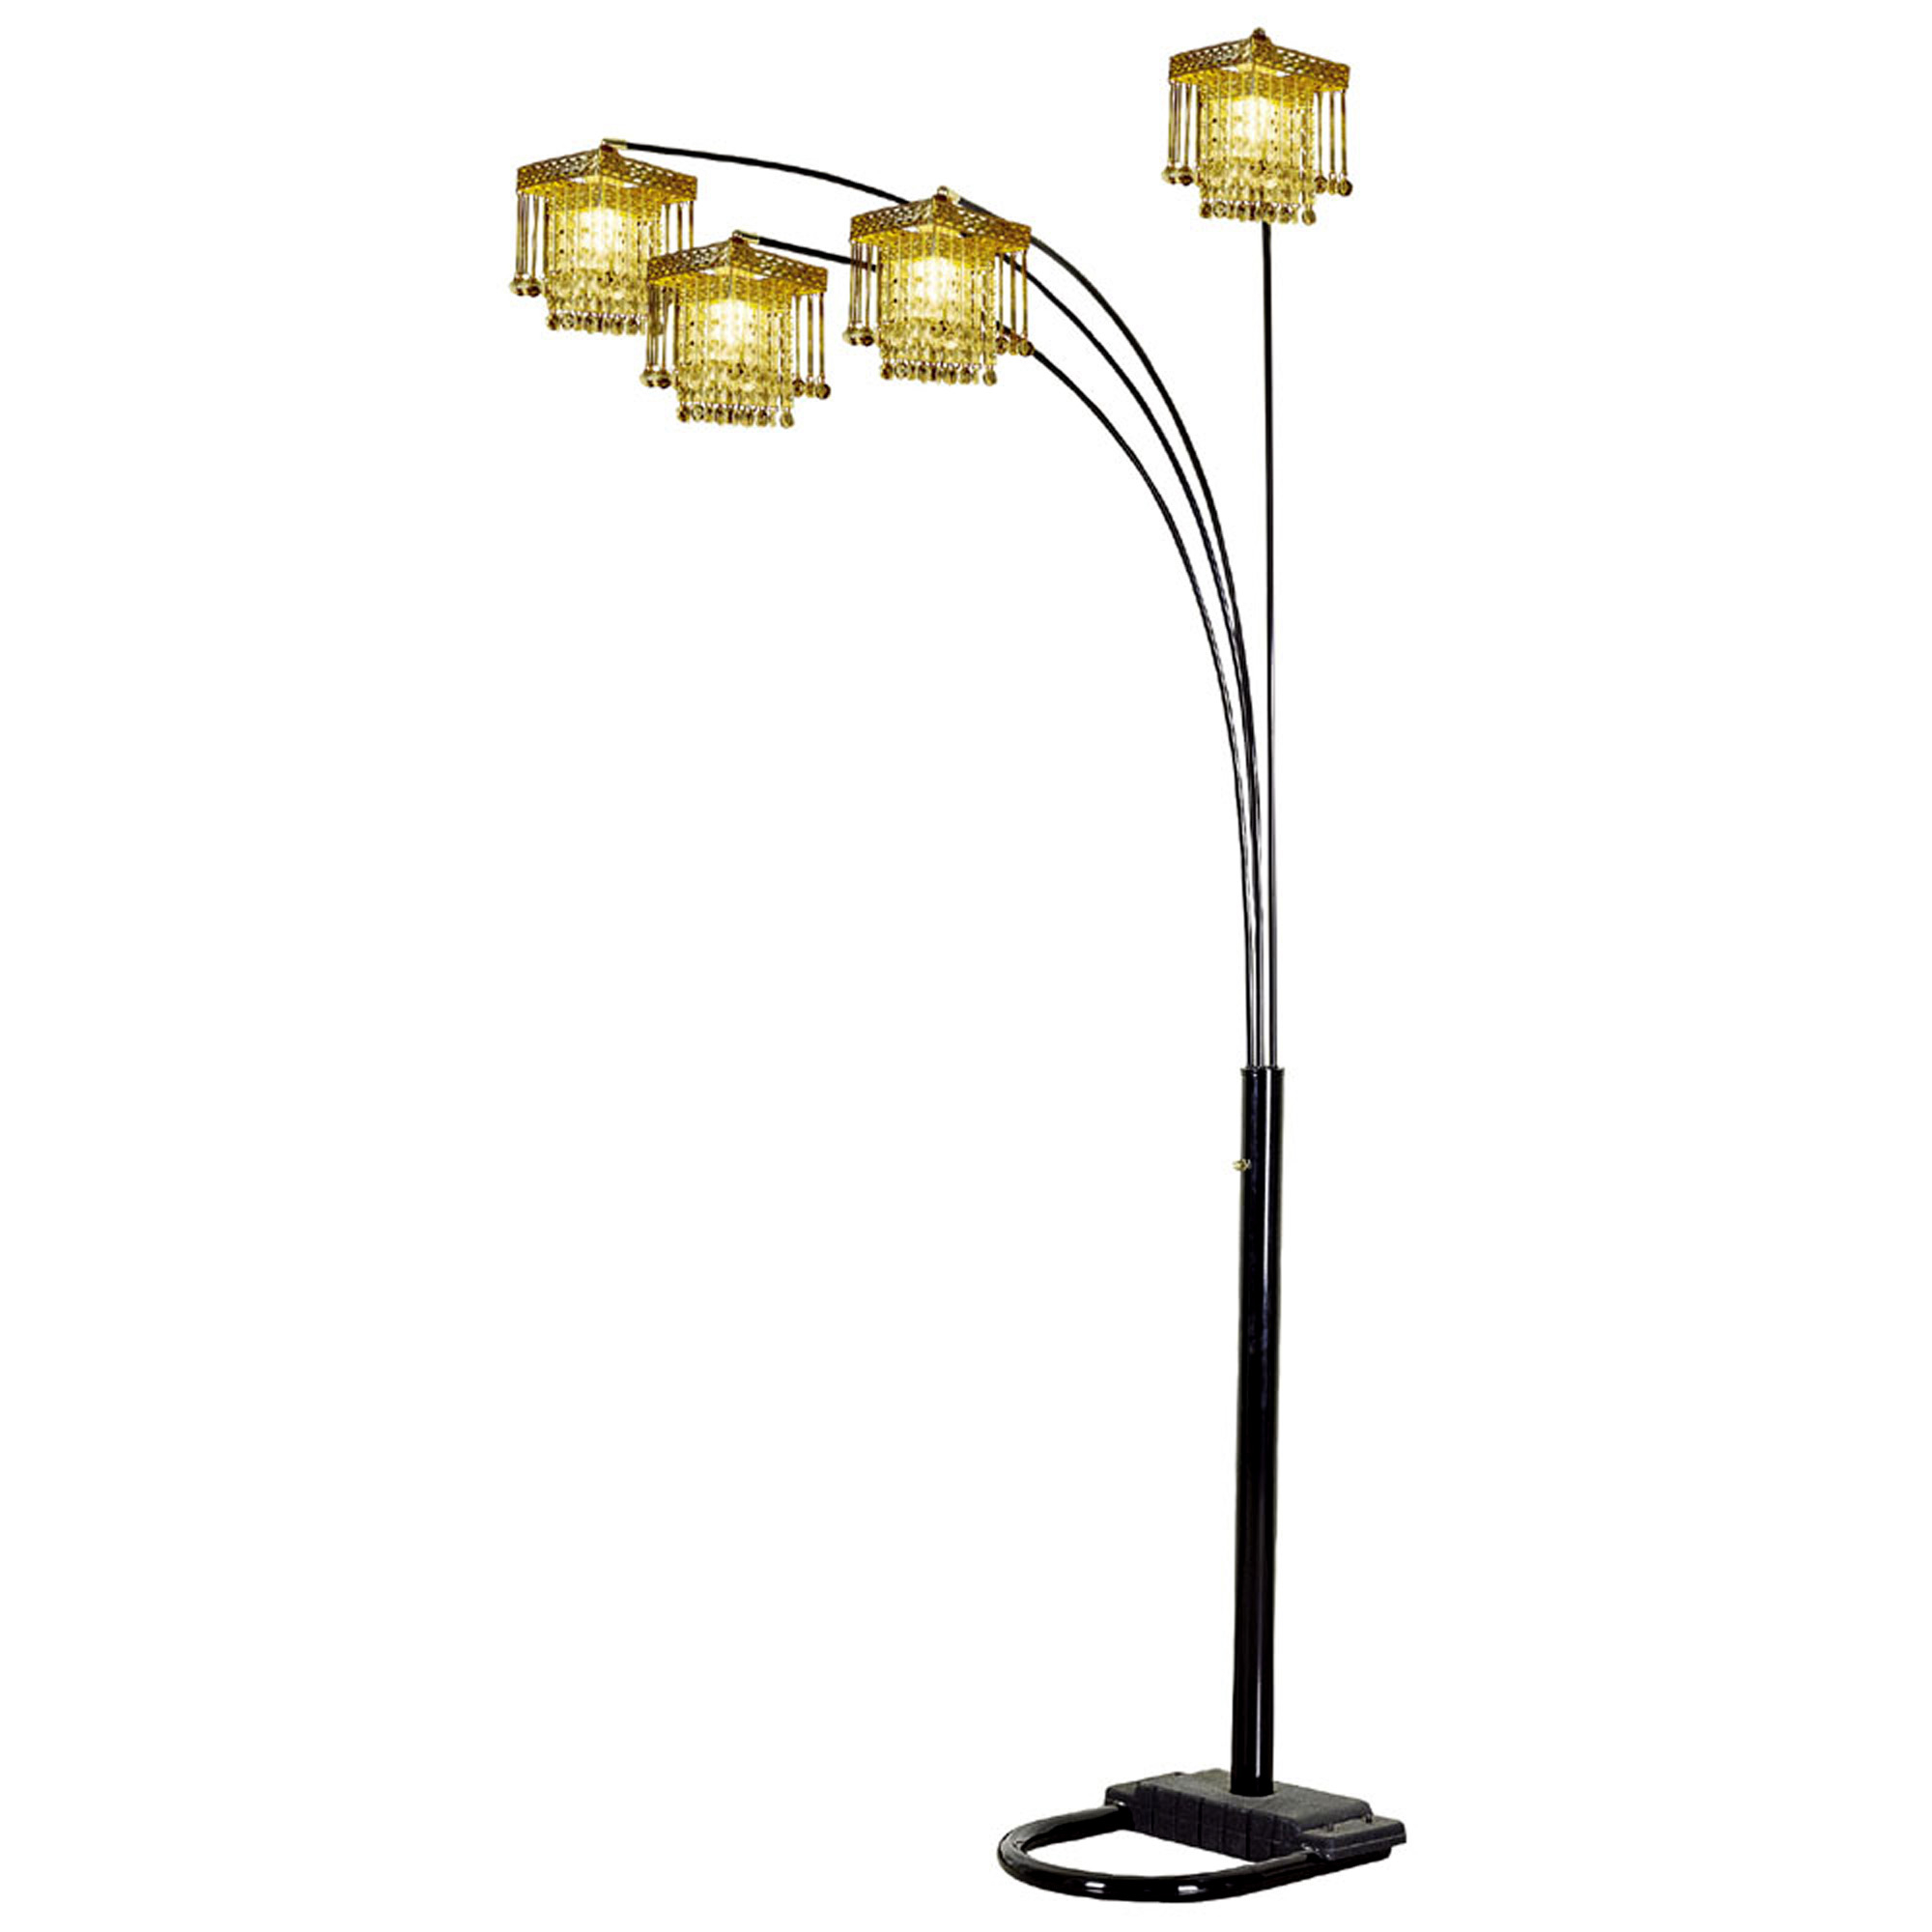 Details About Ore International 84 Inch 5 Arms Arch Floor Lamp Black 6968bk pertaining to dimensions 2000 X 2000